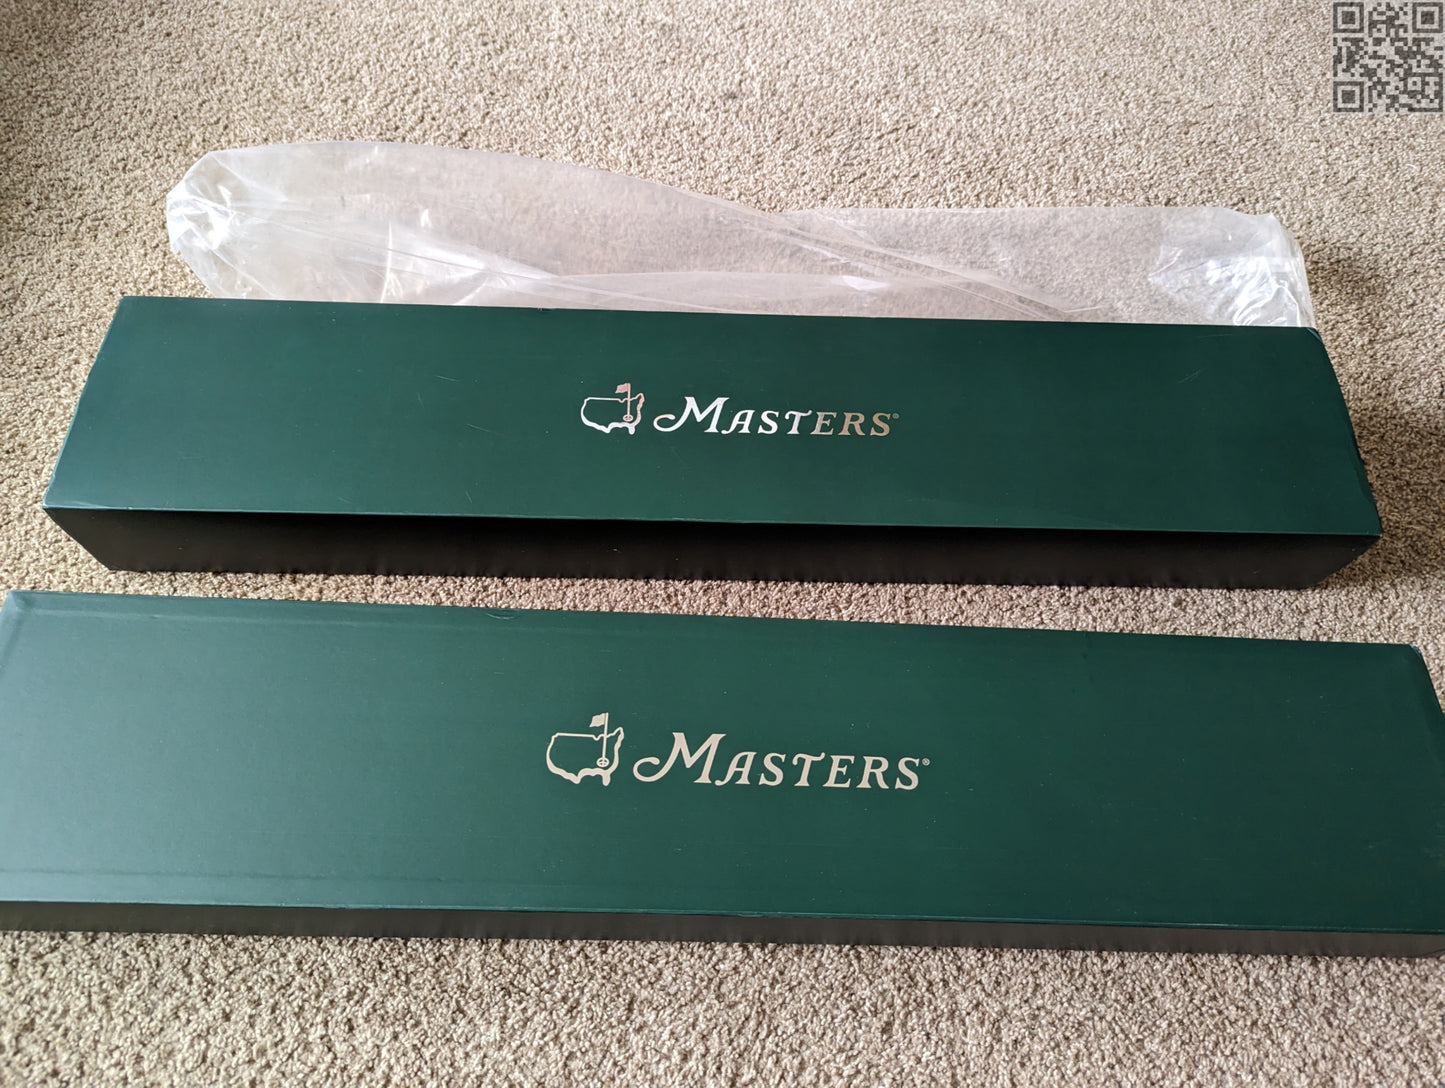 2014 Scotty Cameron Masters Tournament Limited Edition Putter 500